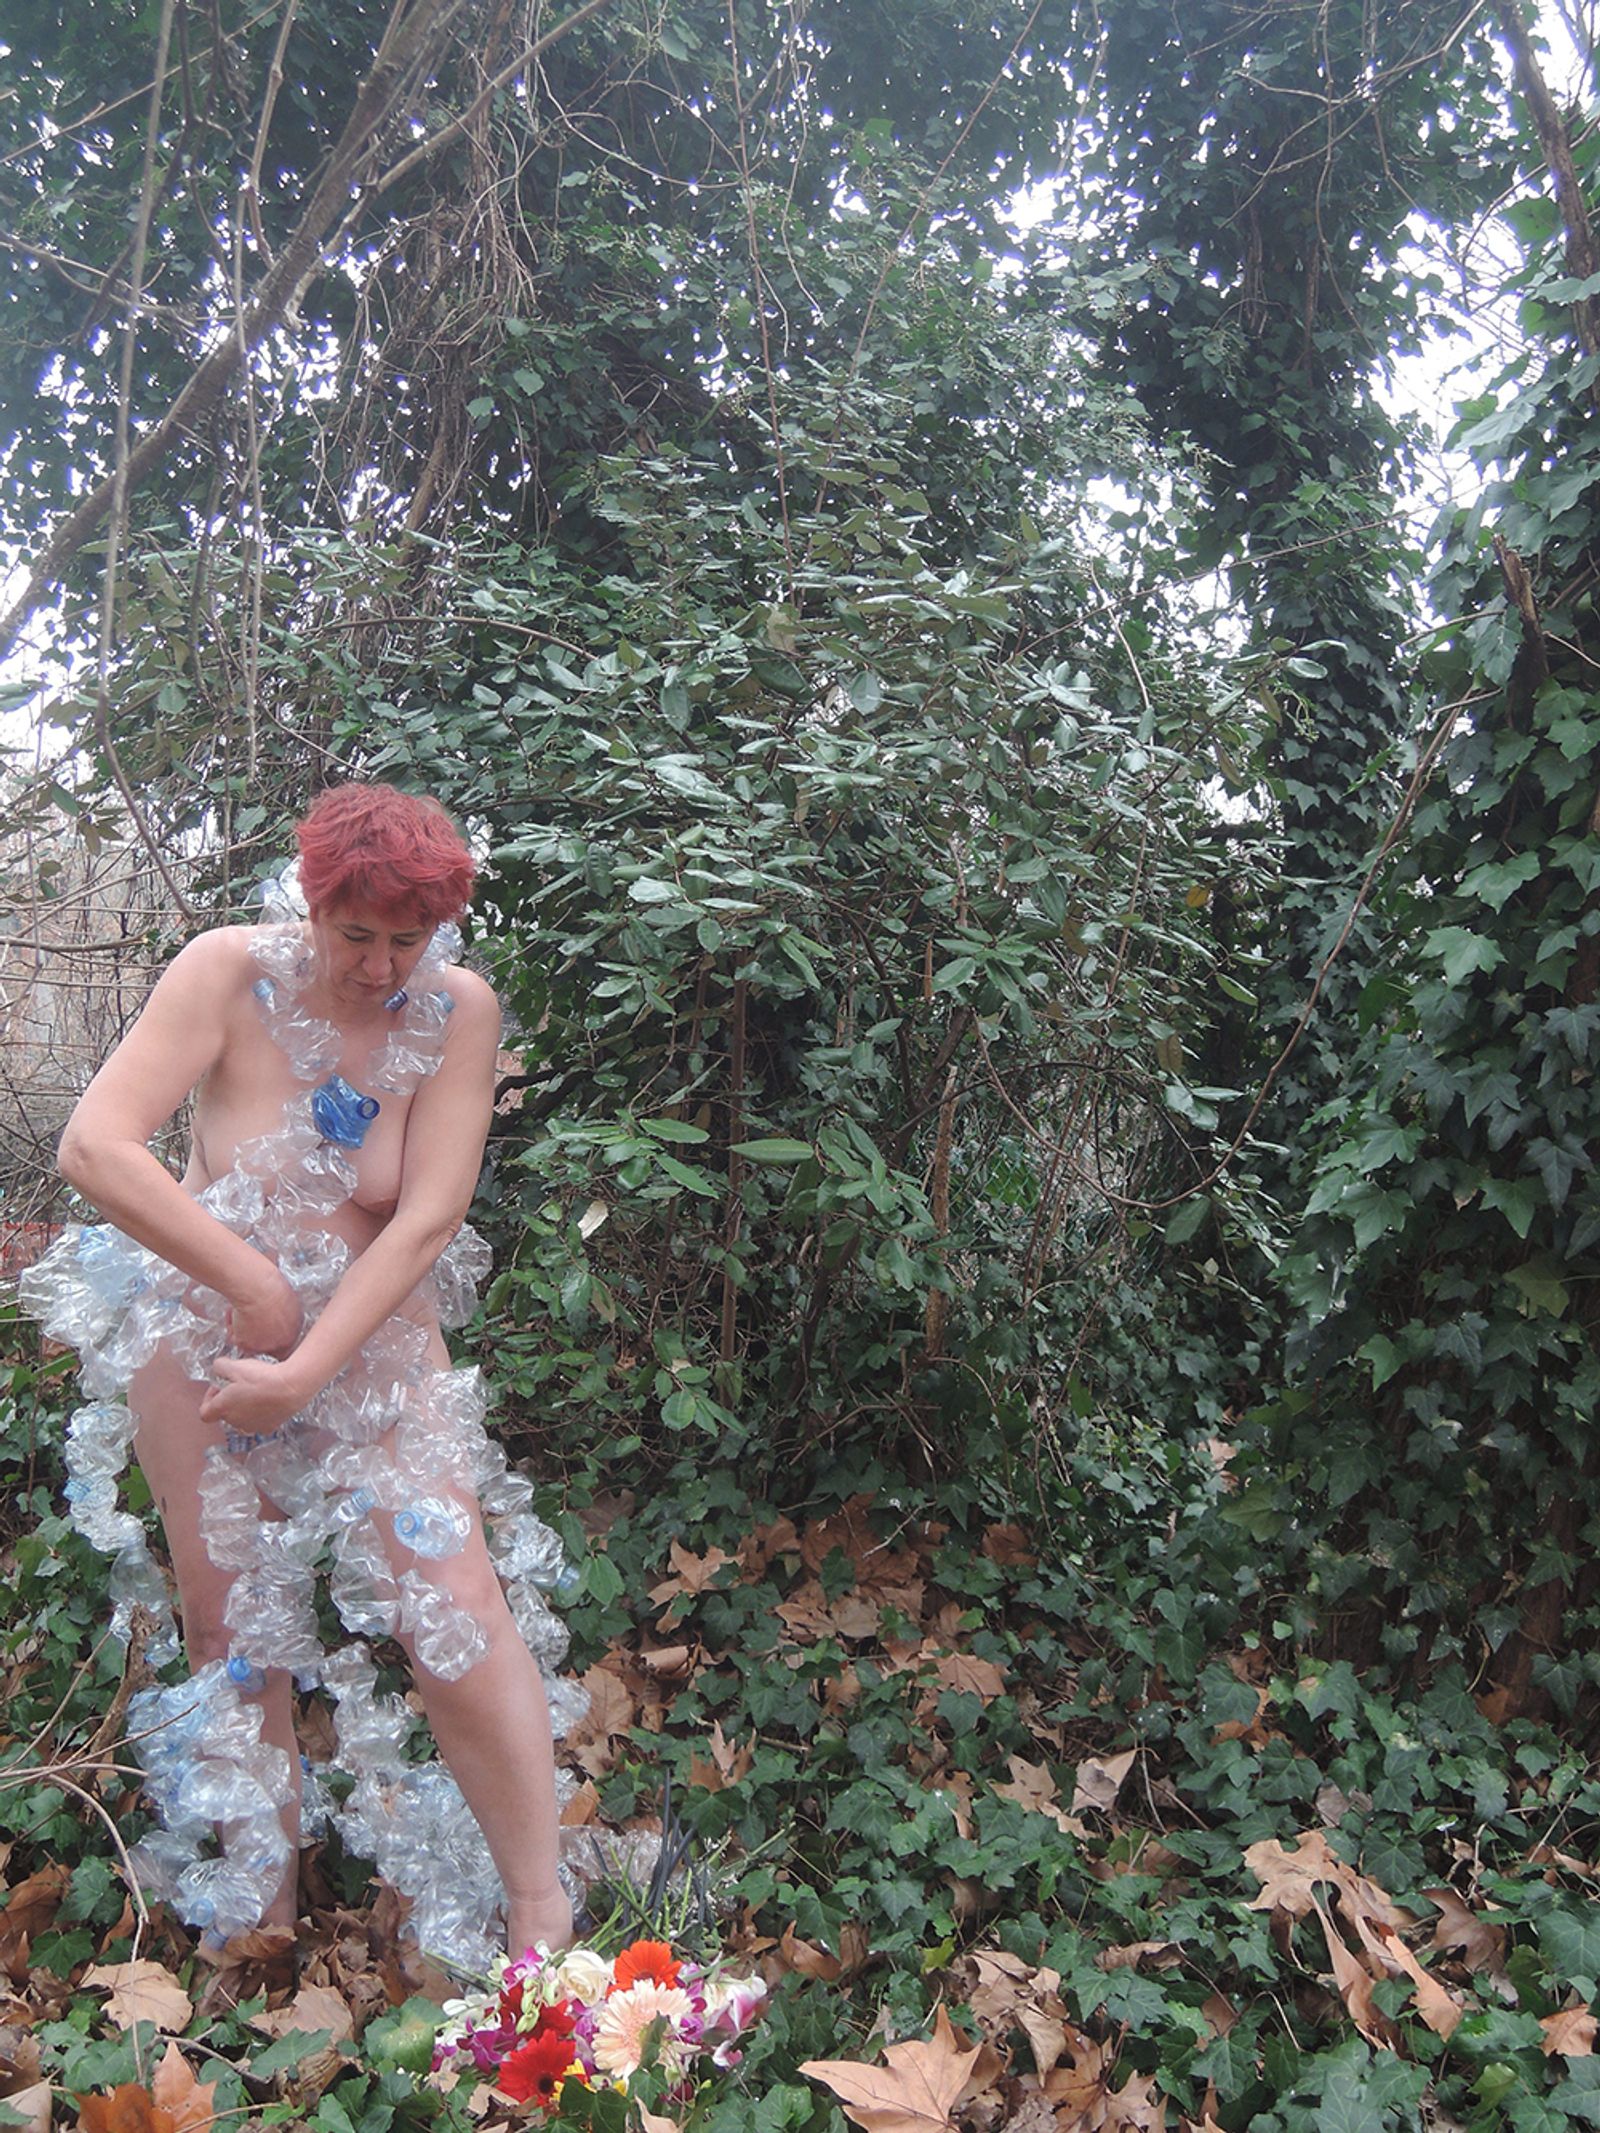 © bruna ginammi - Etrenity Selfportrait our clothes are made of plastic